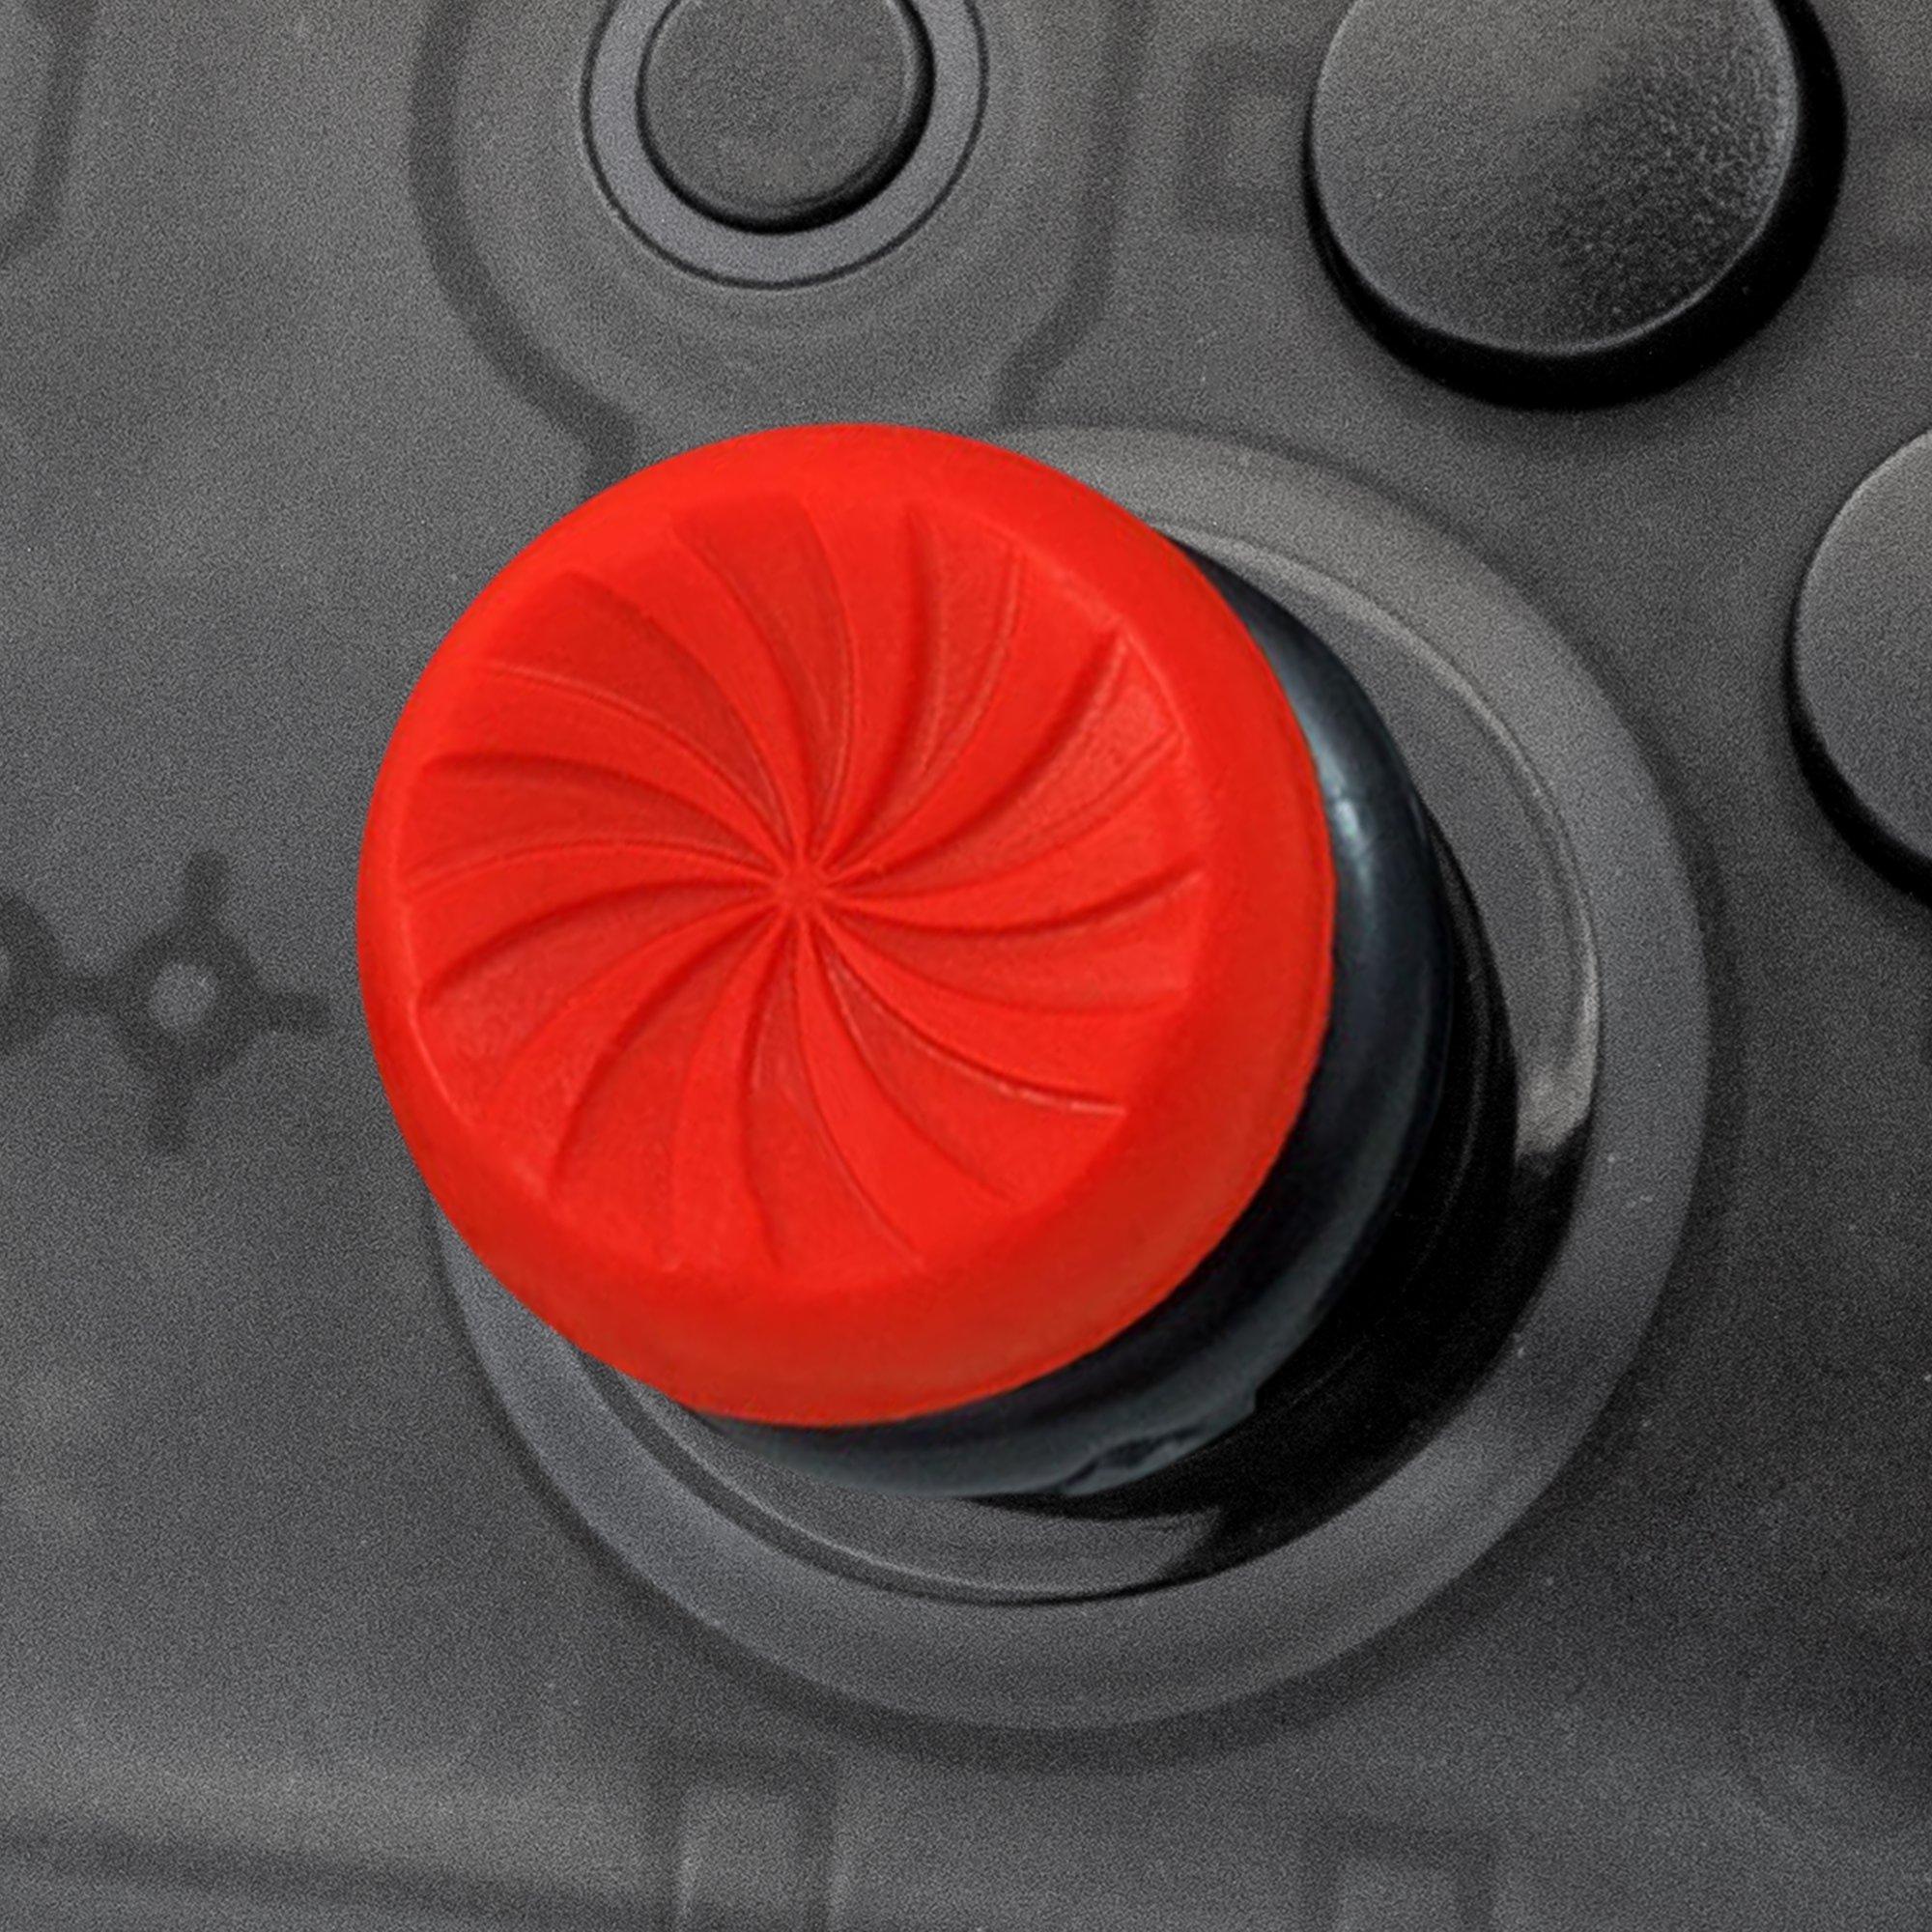 FPS Freek Inferno Performance Thumbsticks for Nintendo Switch